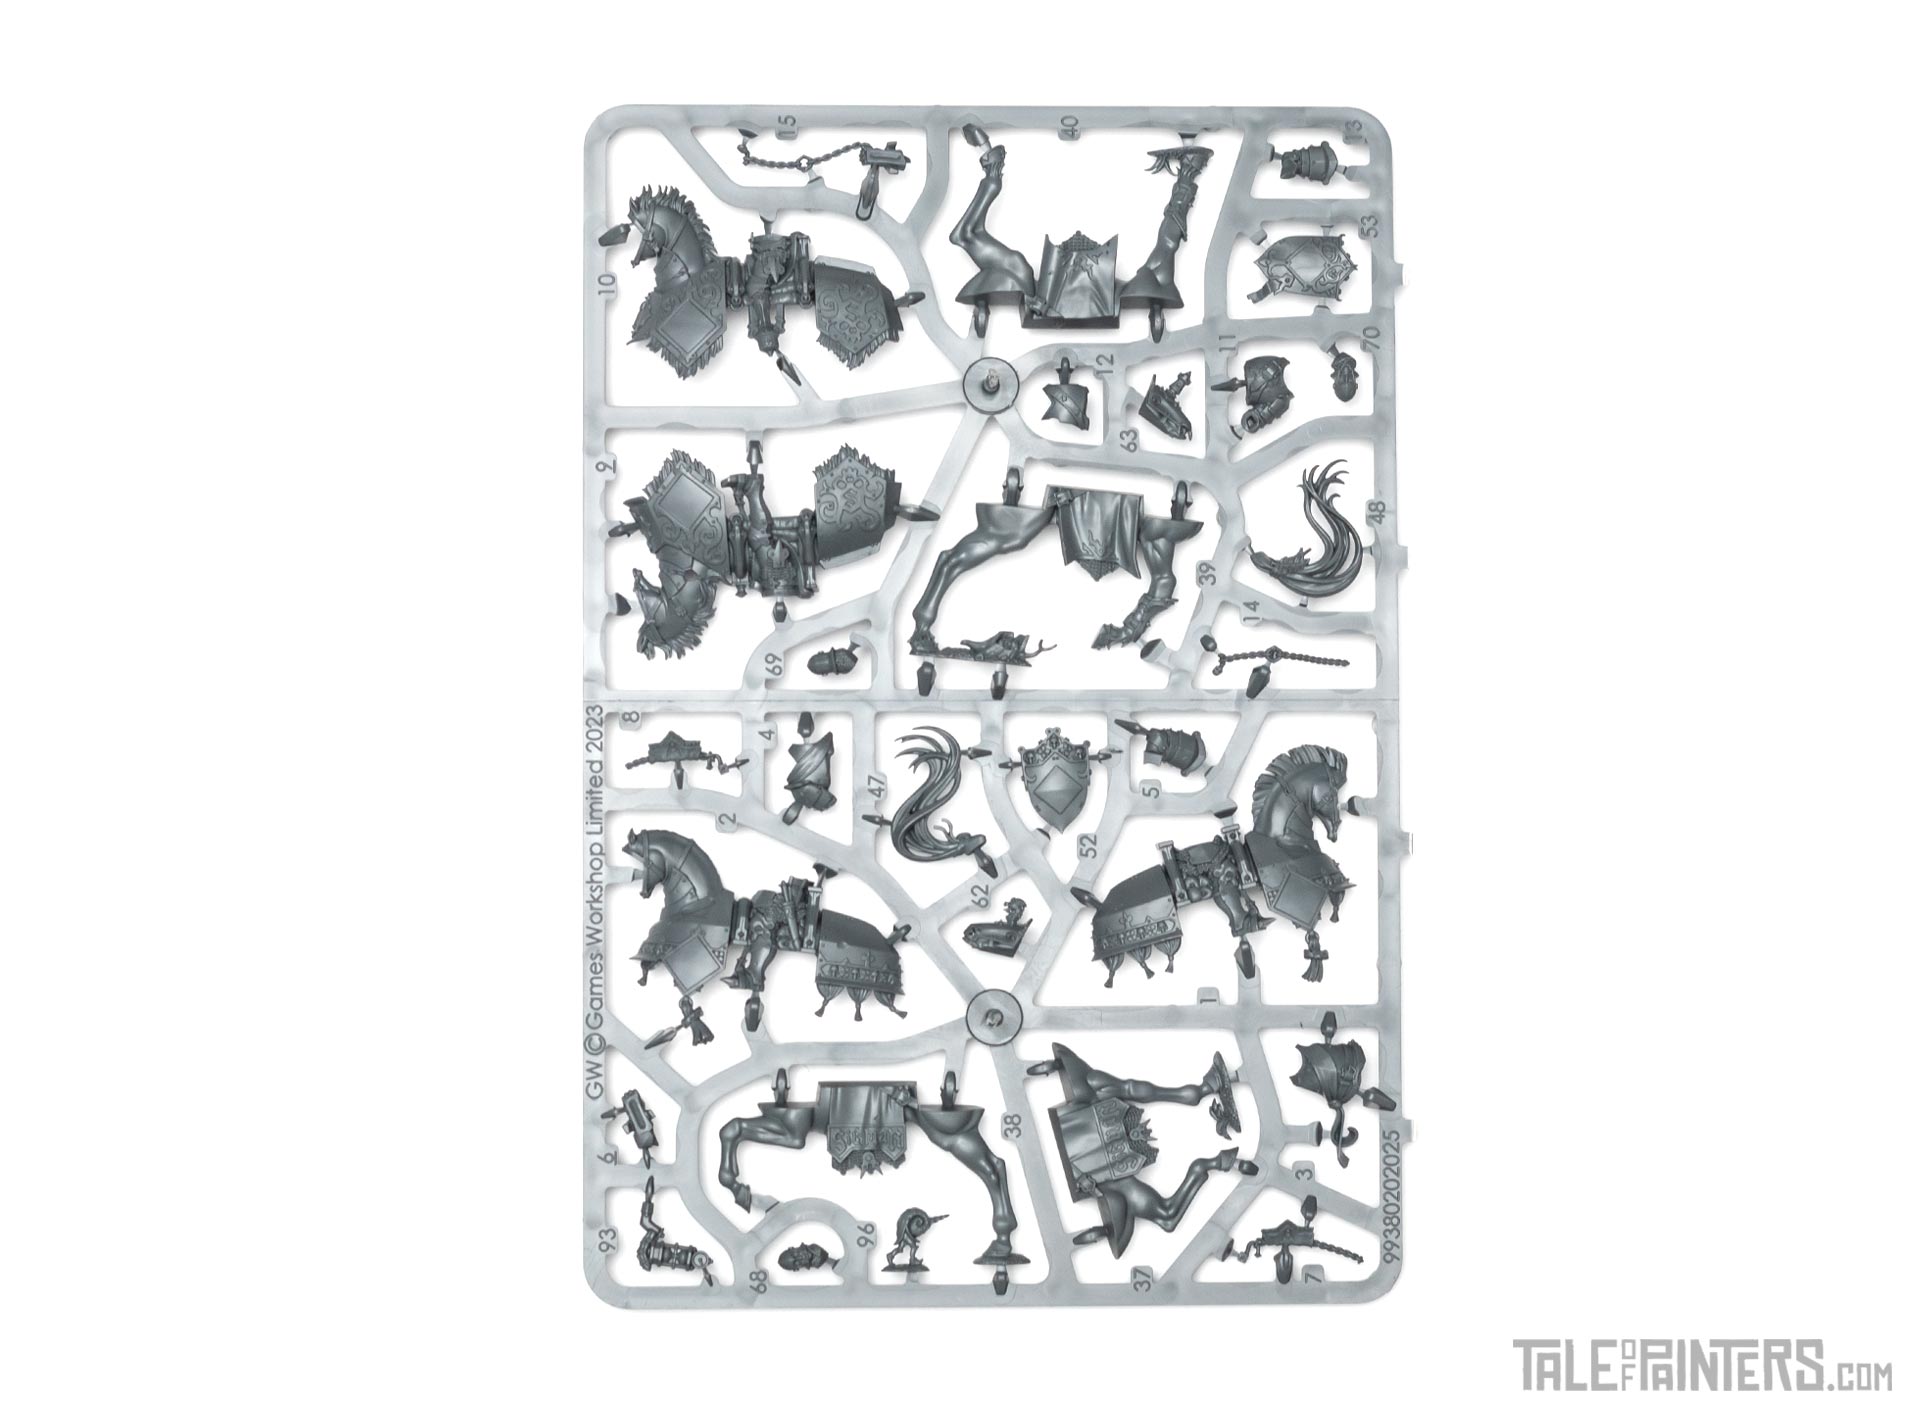 Freeguild Cavaliers sprue 3 from Stahly's Cities of Sigmar army set review